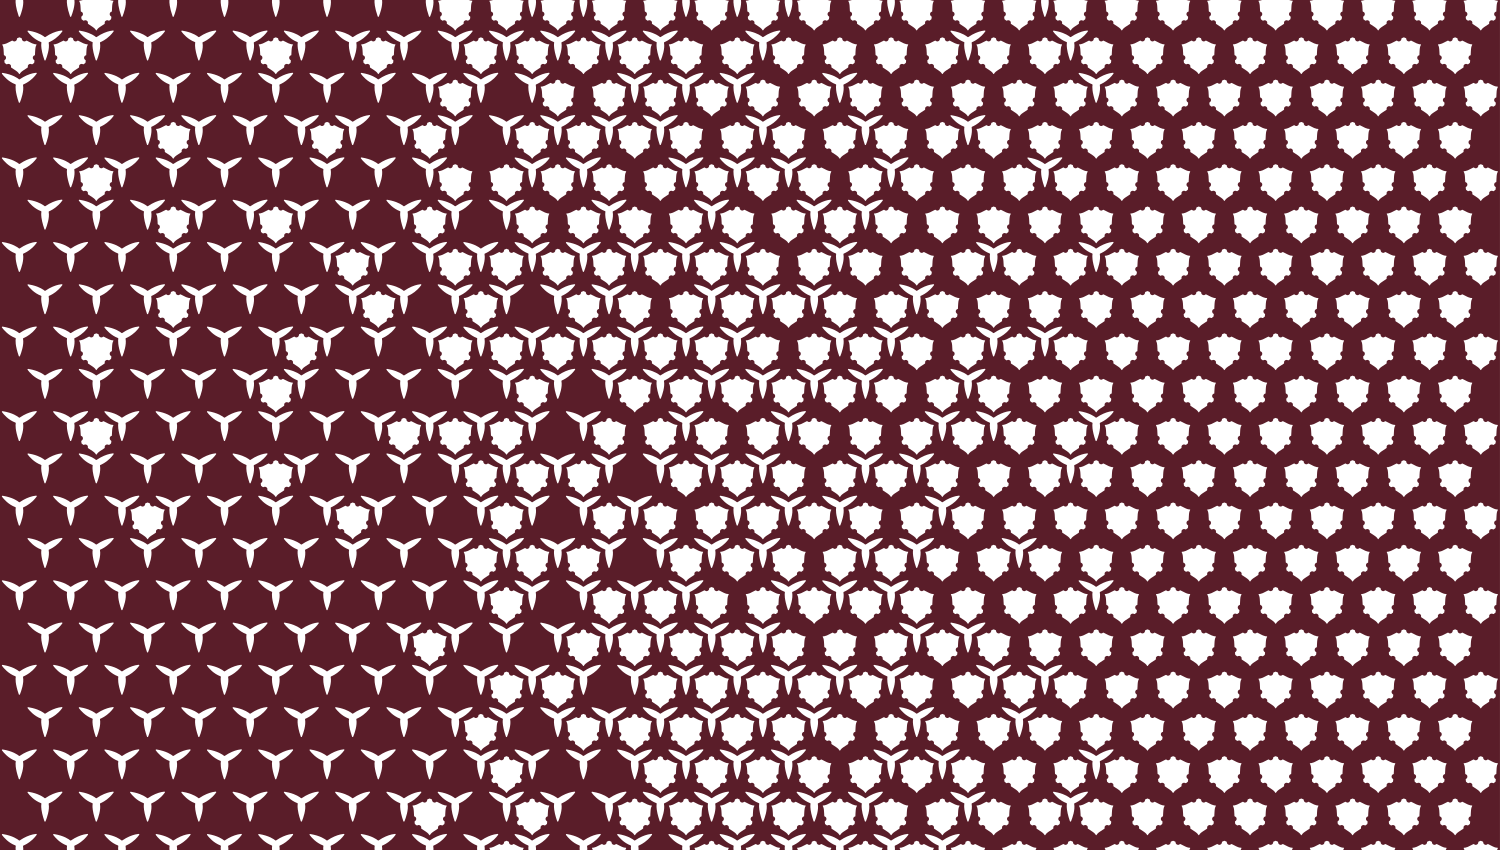 Parasoleil™ Apiary© pattern displayed with a burgundy color overlay